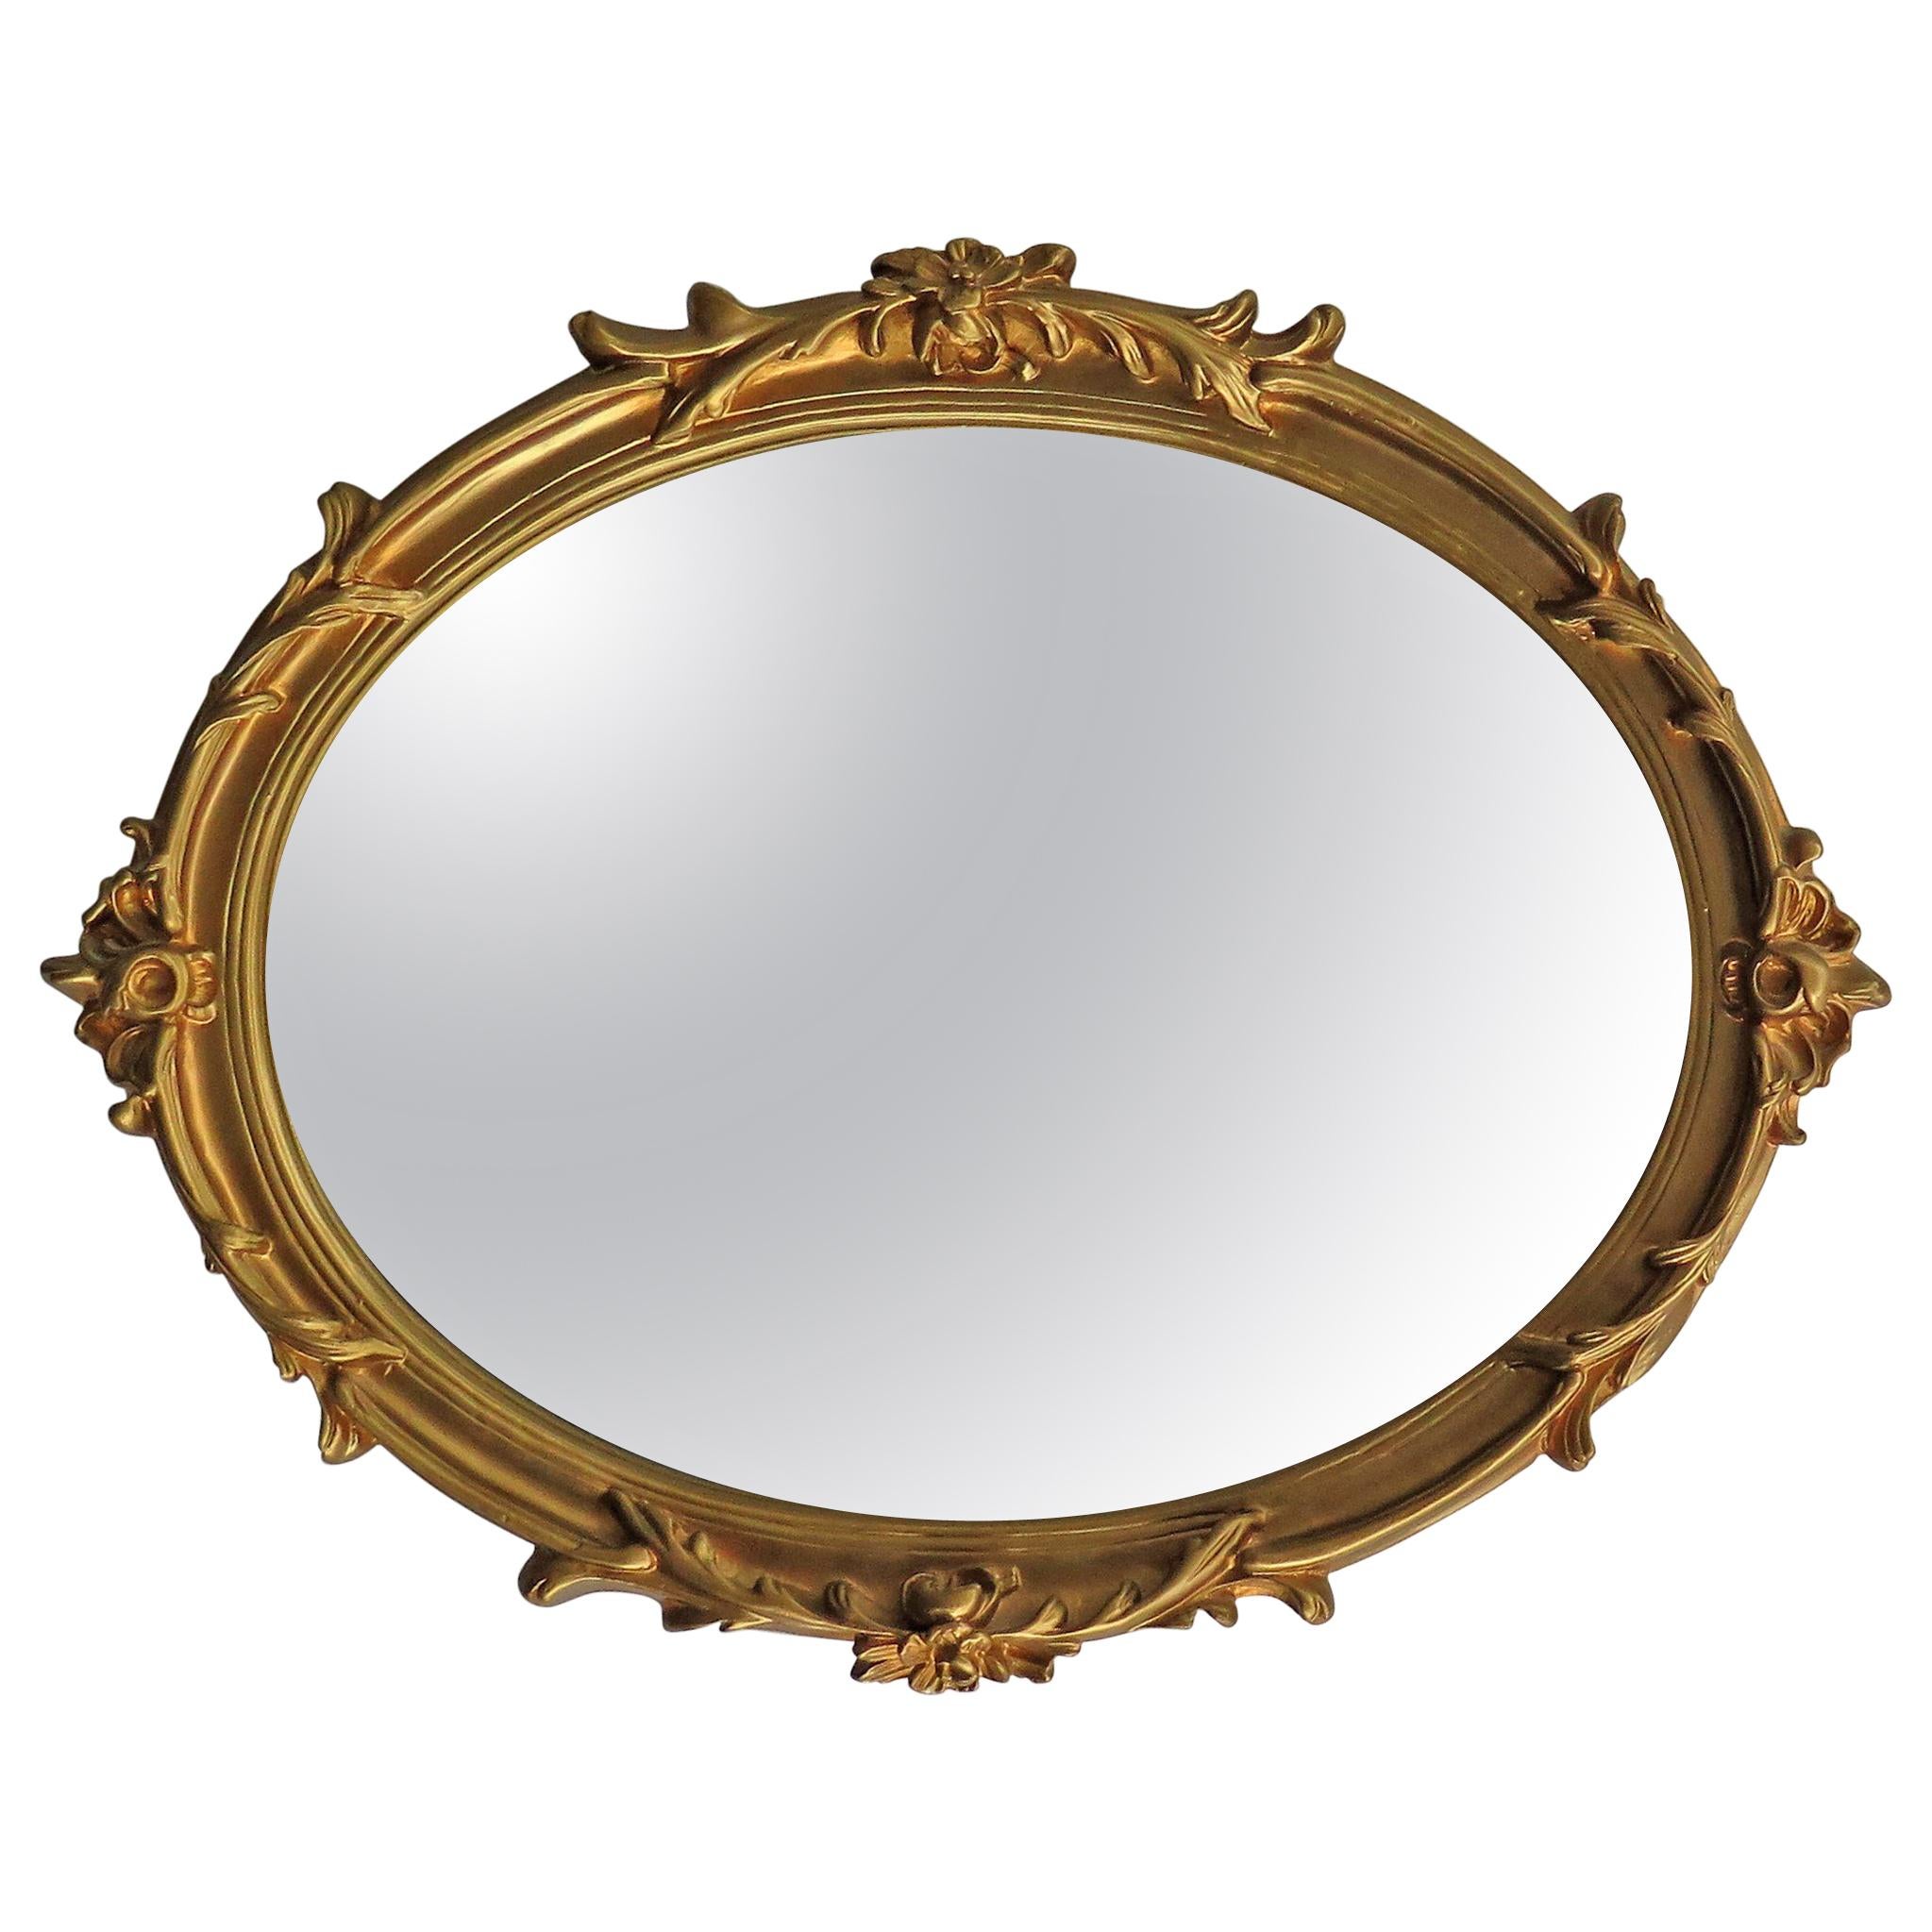 Oval Wall Mirror with Rococo Gold Finish Frame of Gesso on Wood, circa 1930